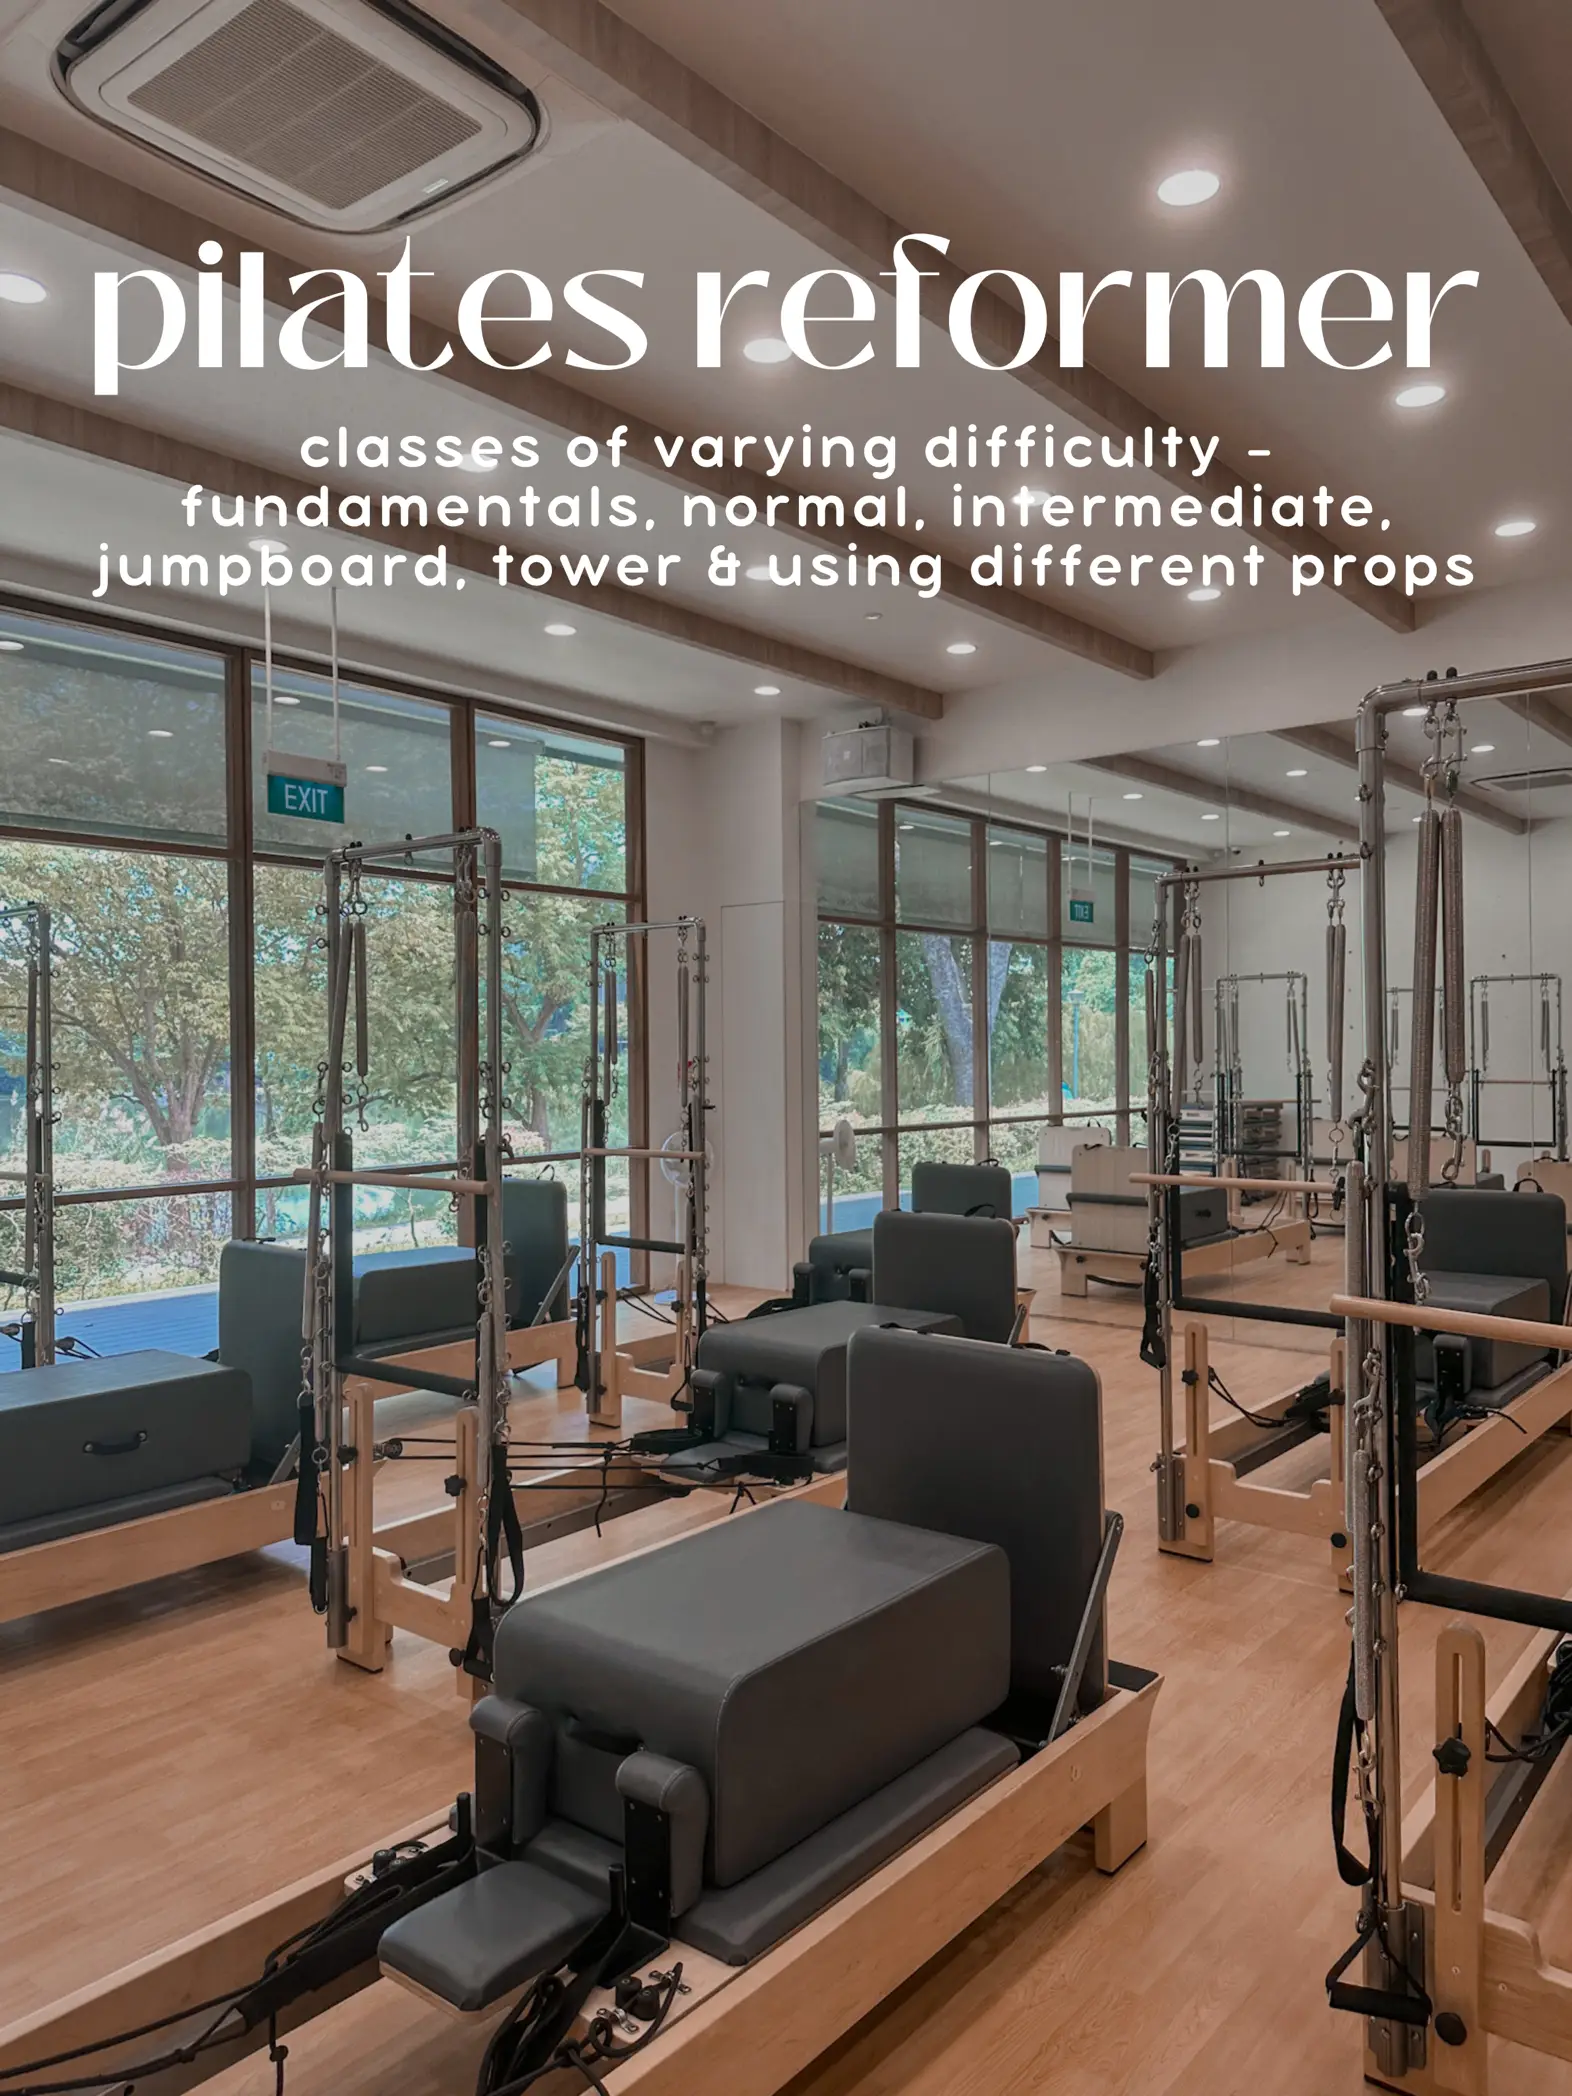 find your zen at this PONDSIDE PILATES studio! 🧘🏻‍♀️, Gallery posted by  jiaxian